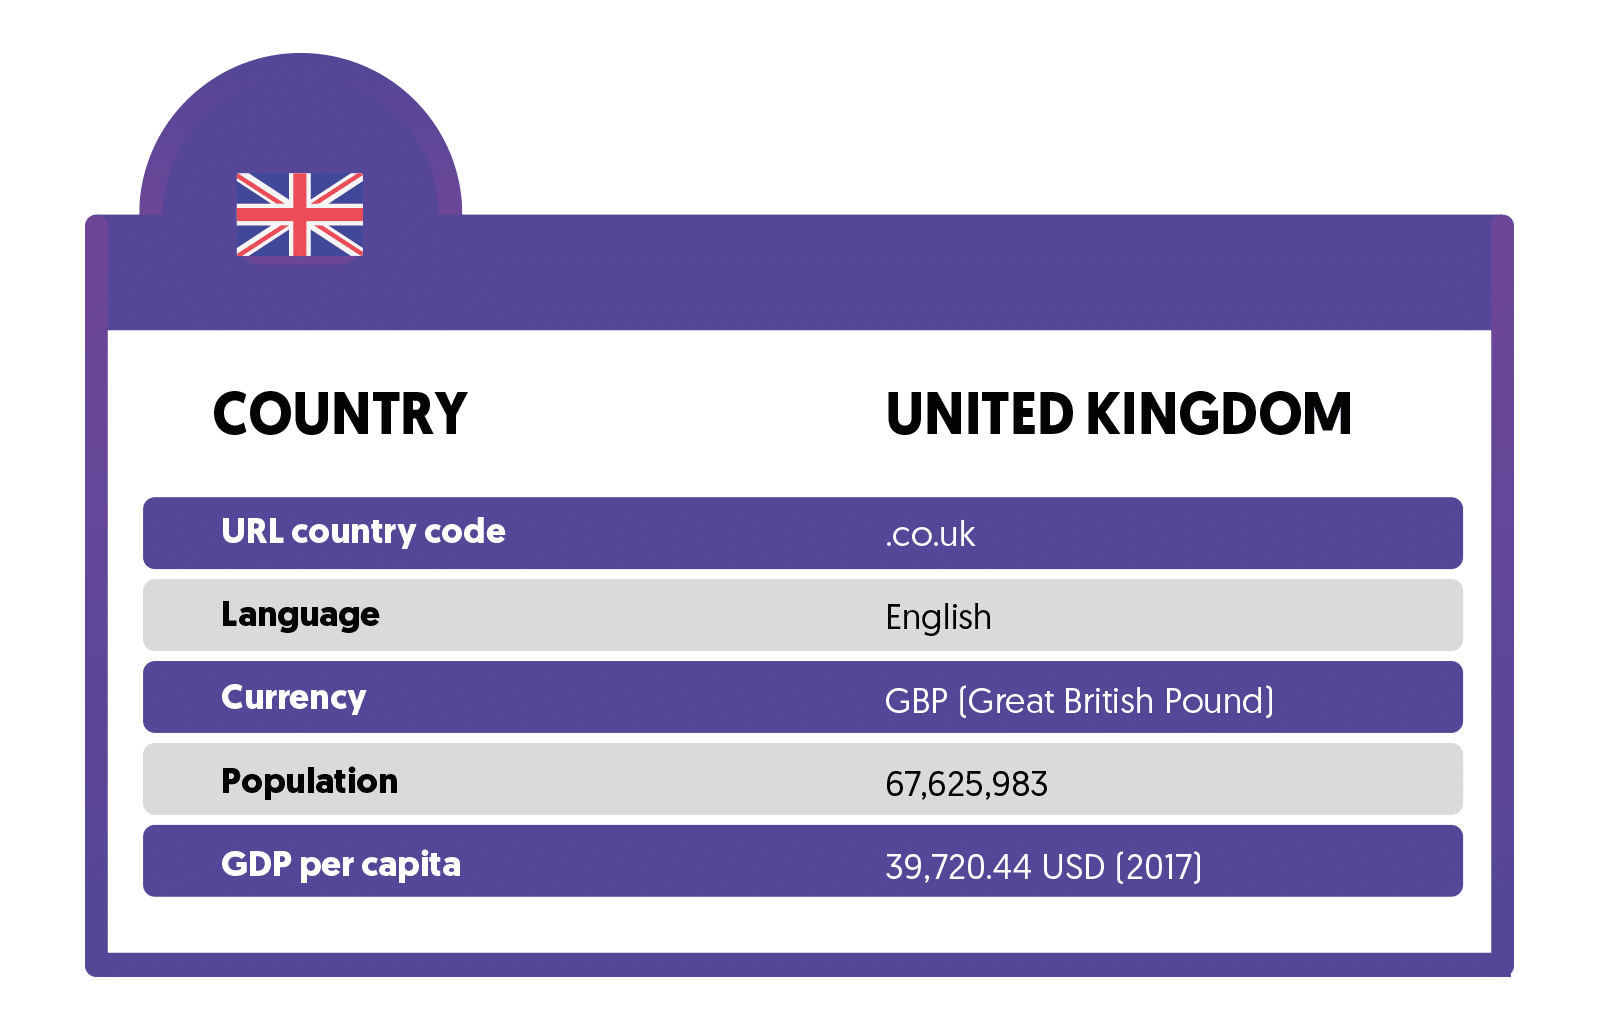 General information about ecommerce in UK